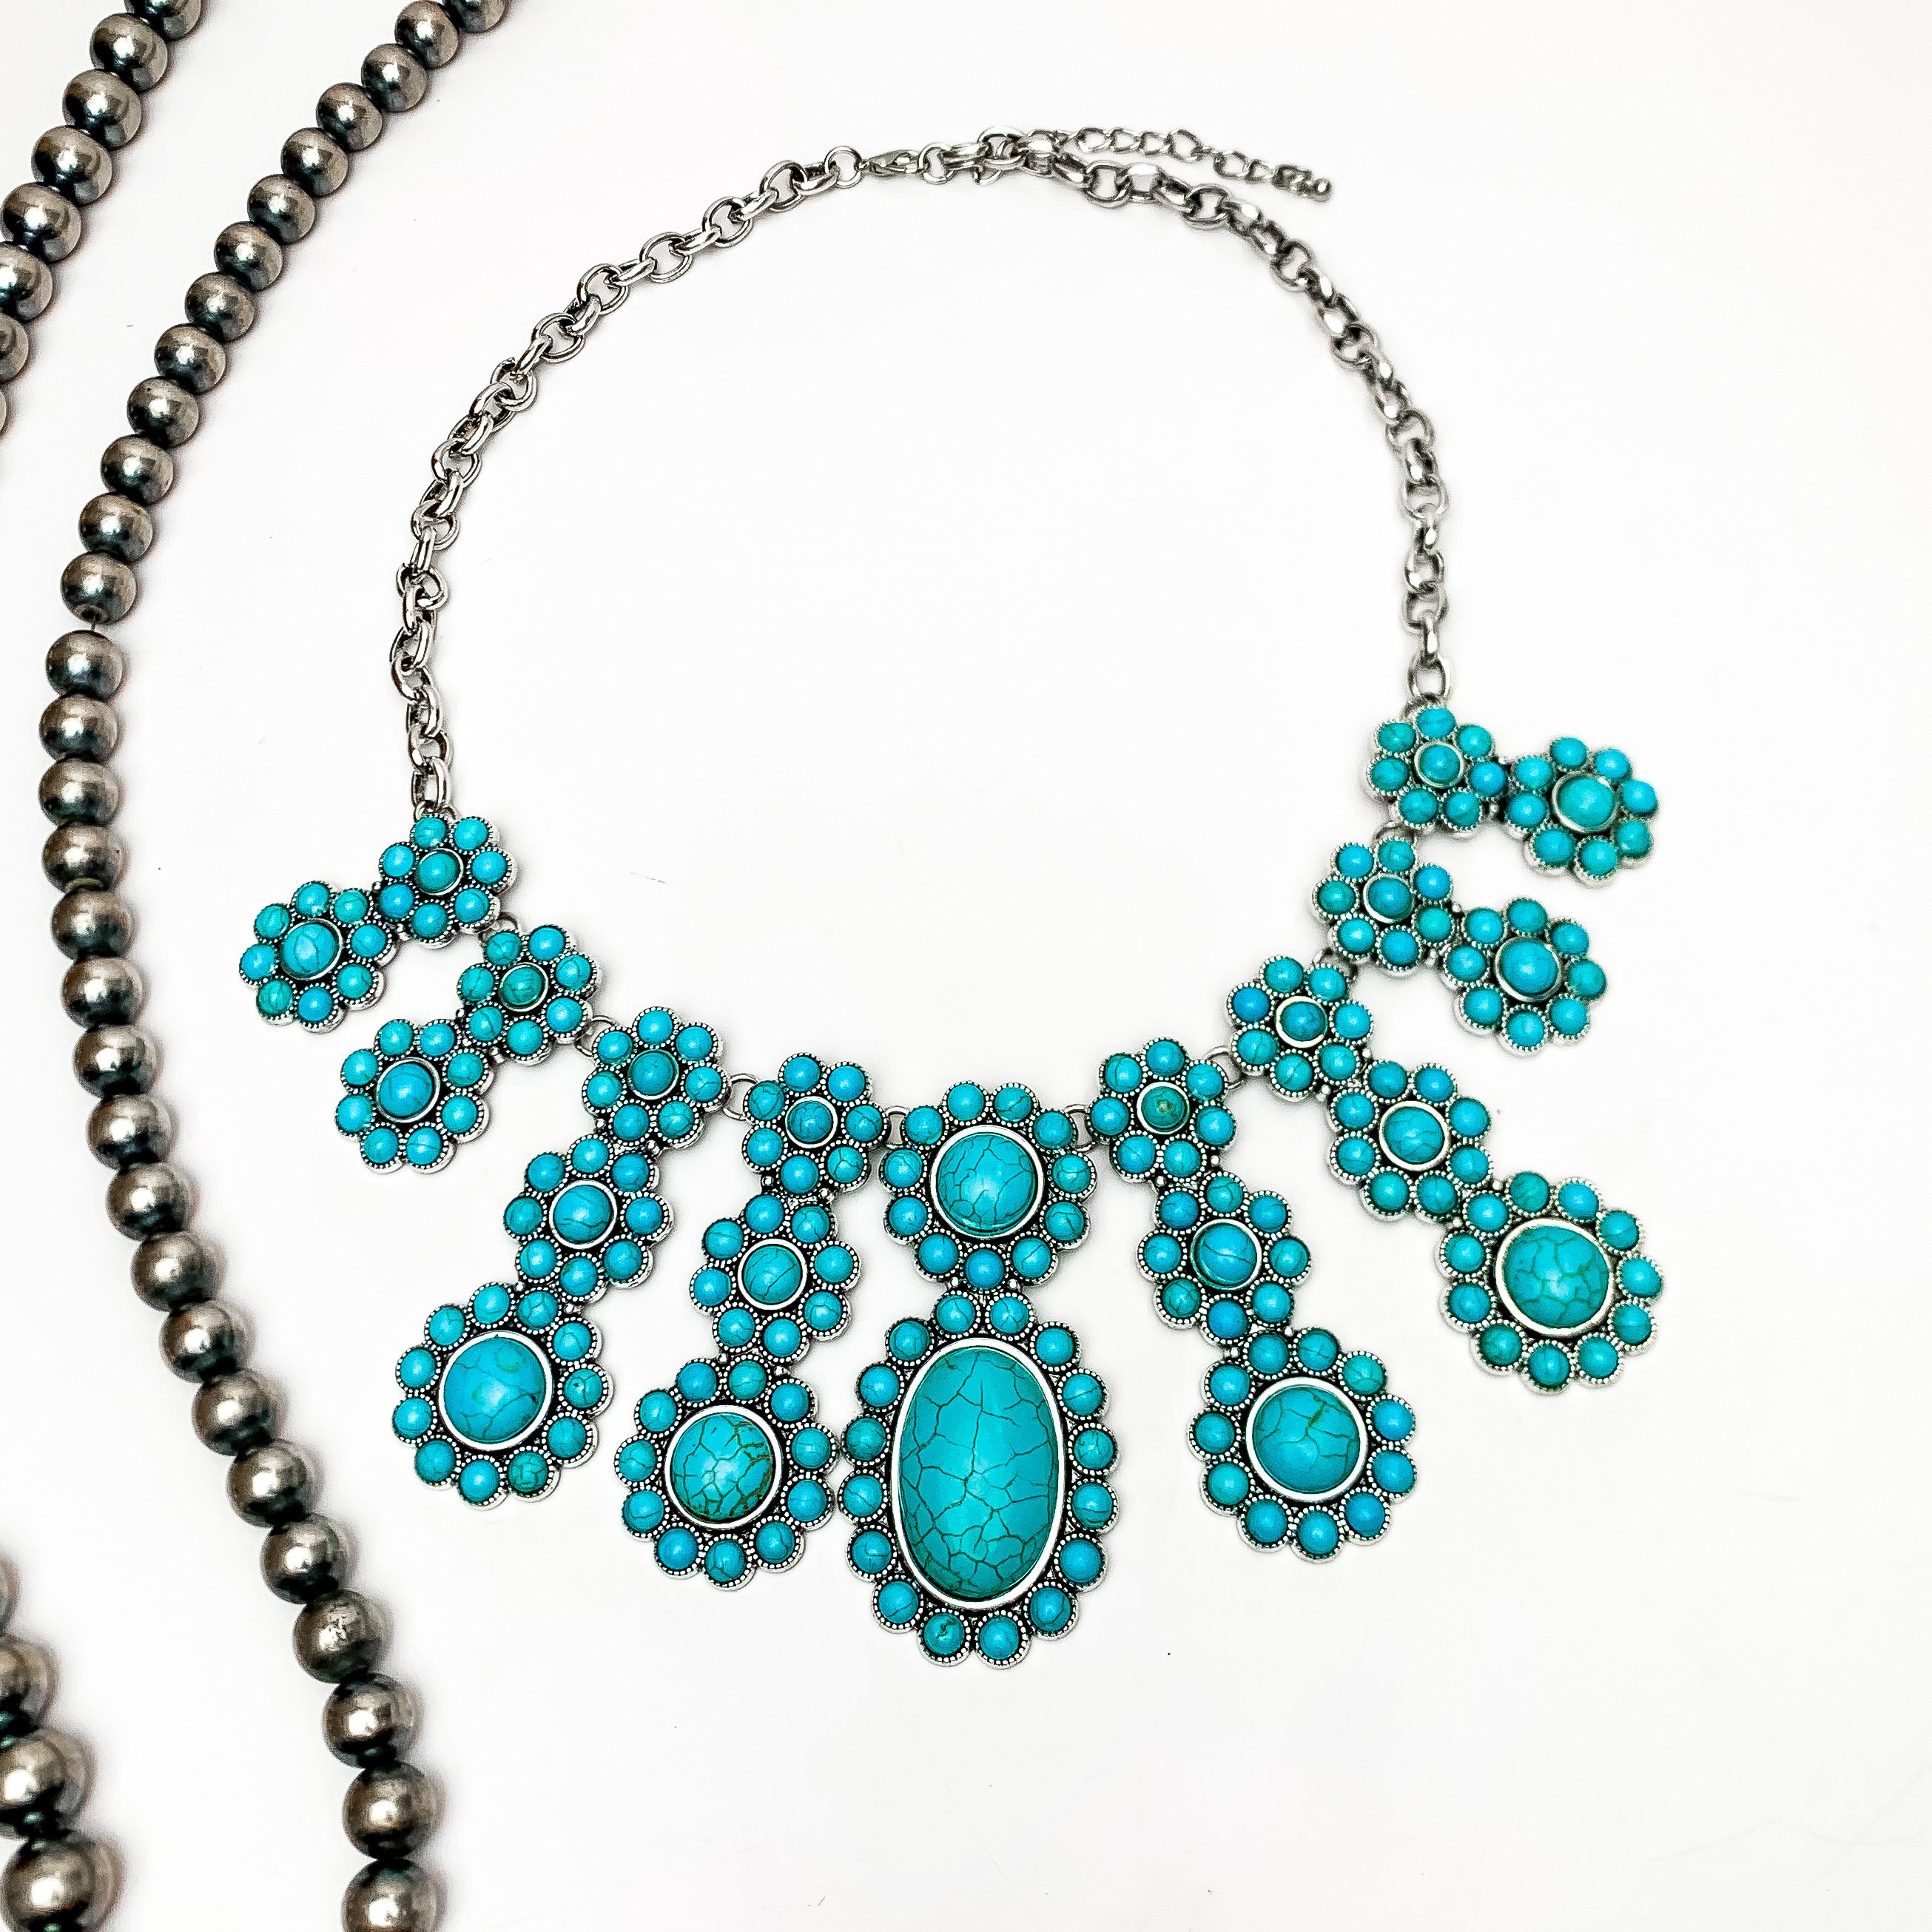 Loud and Proud Turquoise Stone Cluster Necklace. Large cluster statement necklace. This necklace is on a white background with Navajo pearls on the left side for decoration.